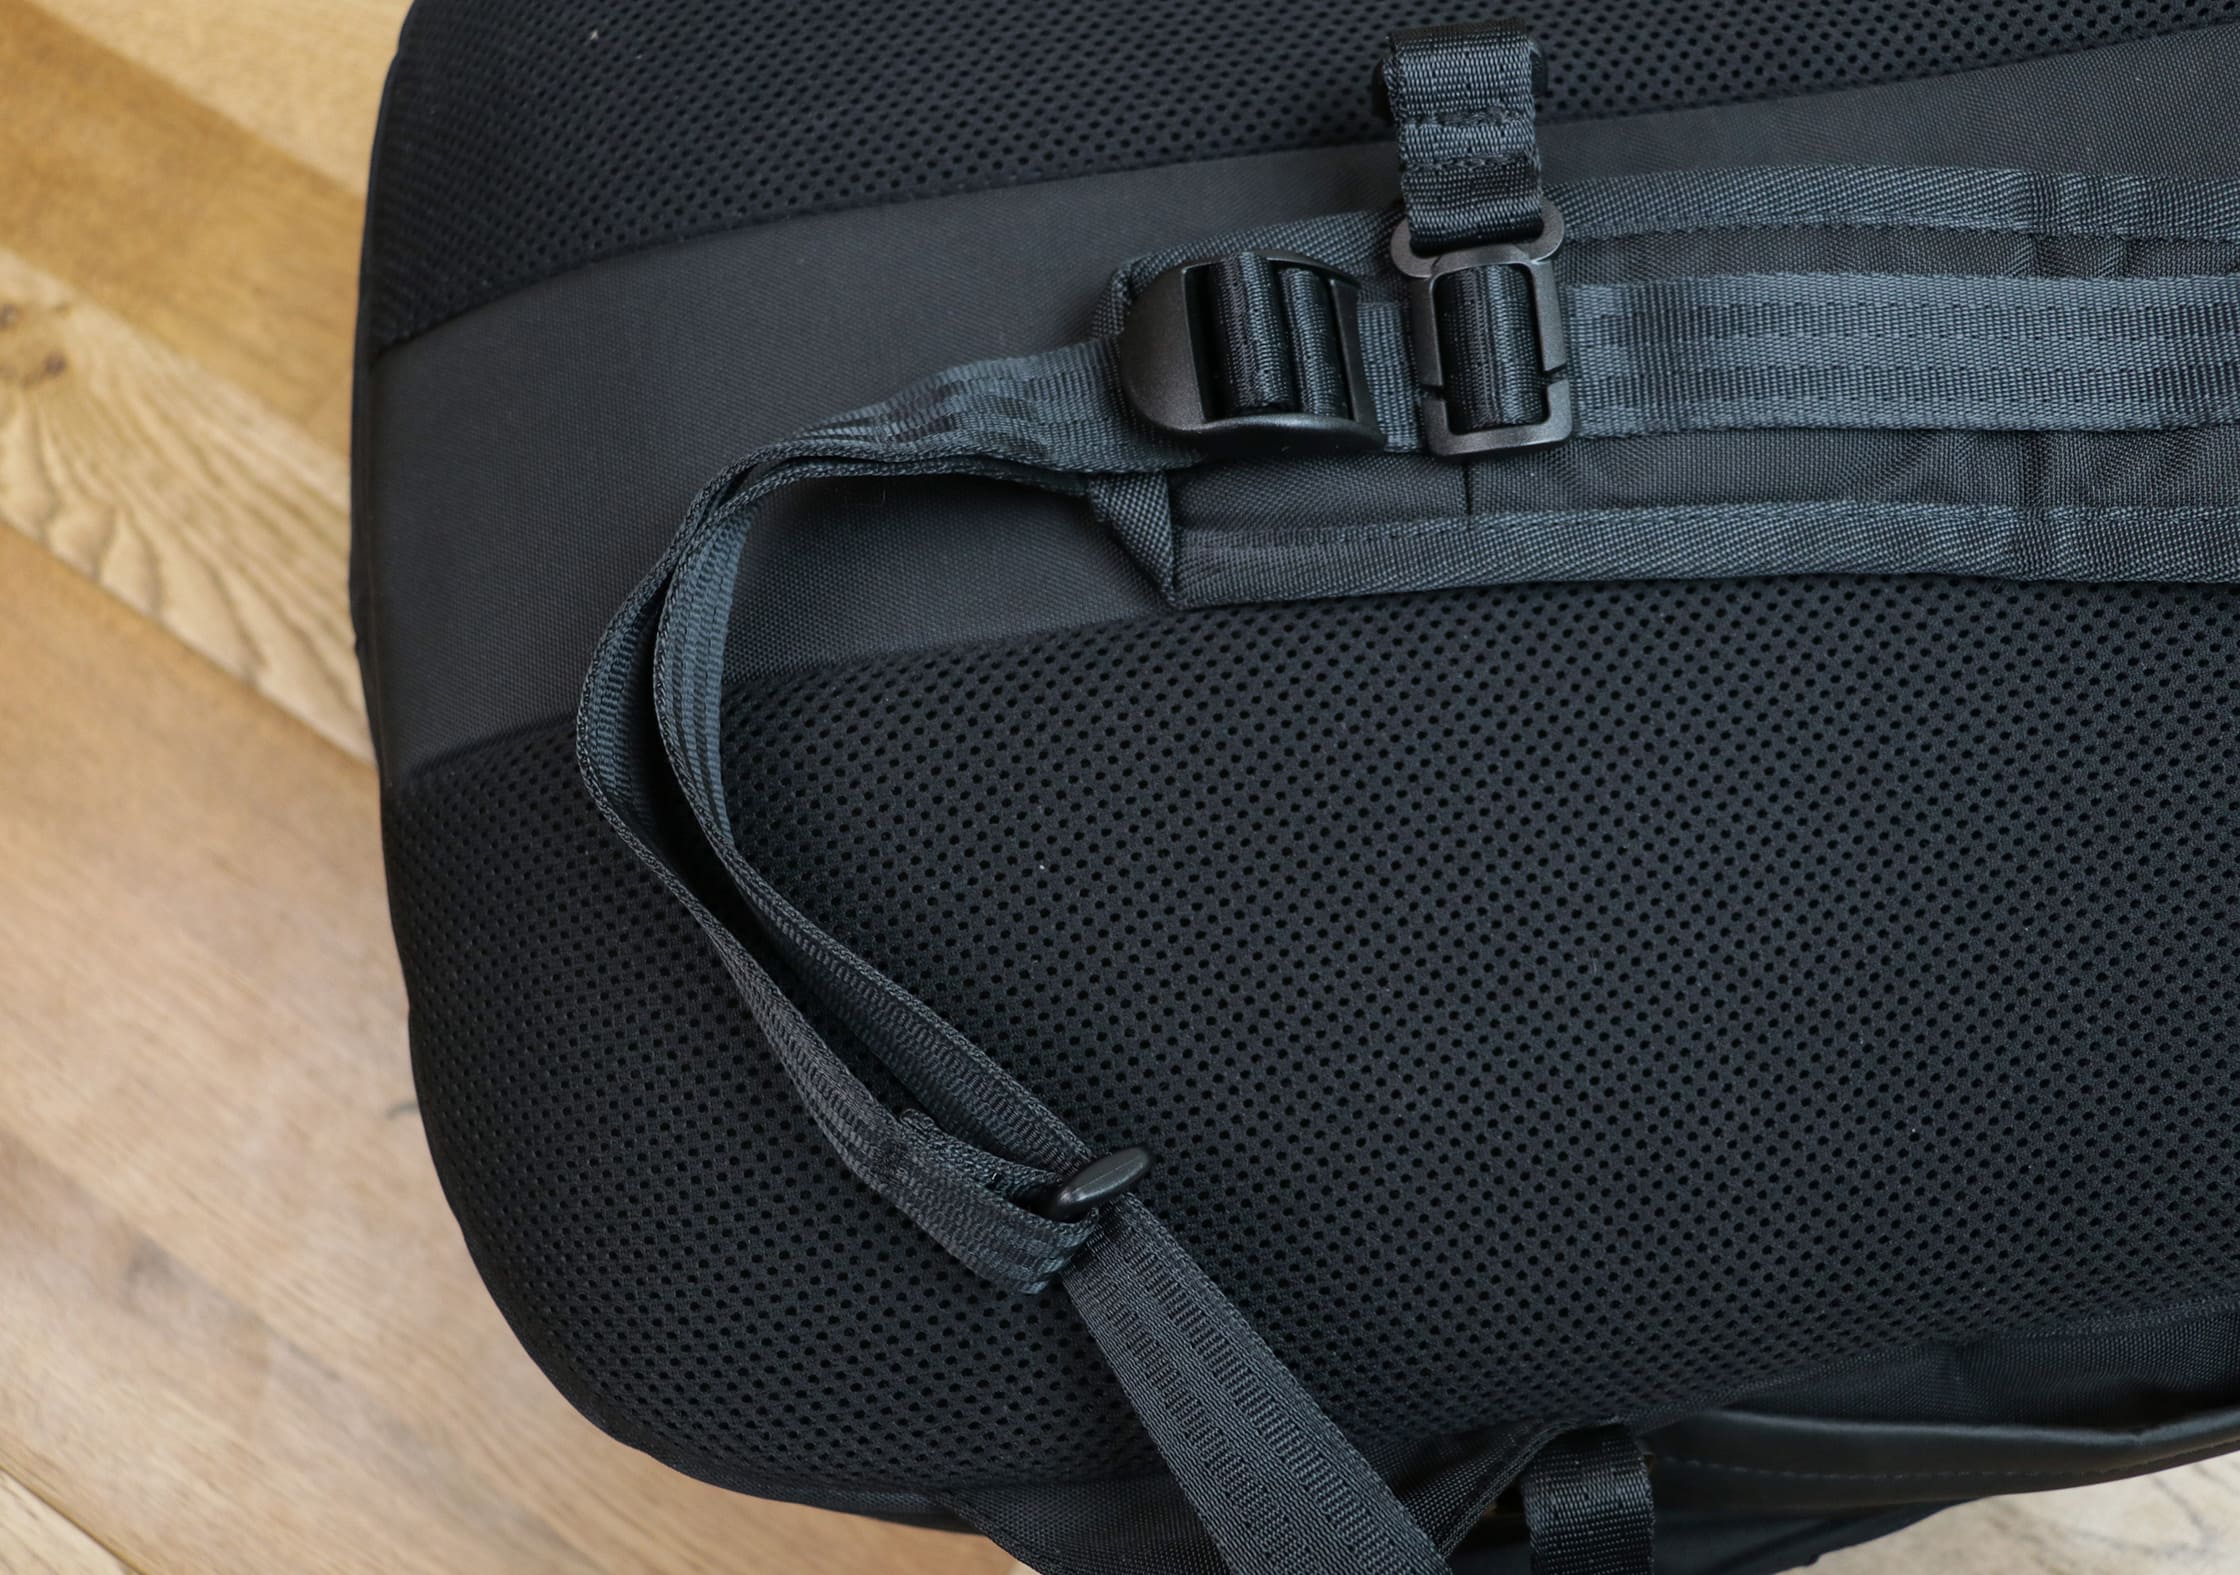 OPPOSETHIS Invisible Carry-On Shoulder Strap Keeper System